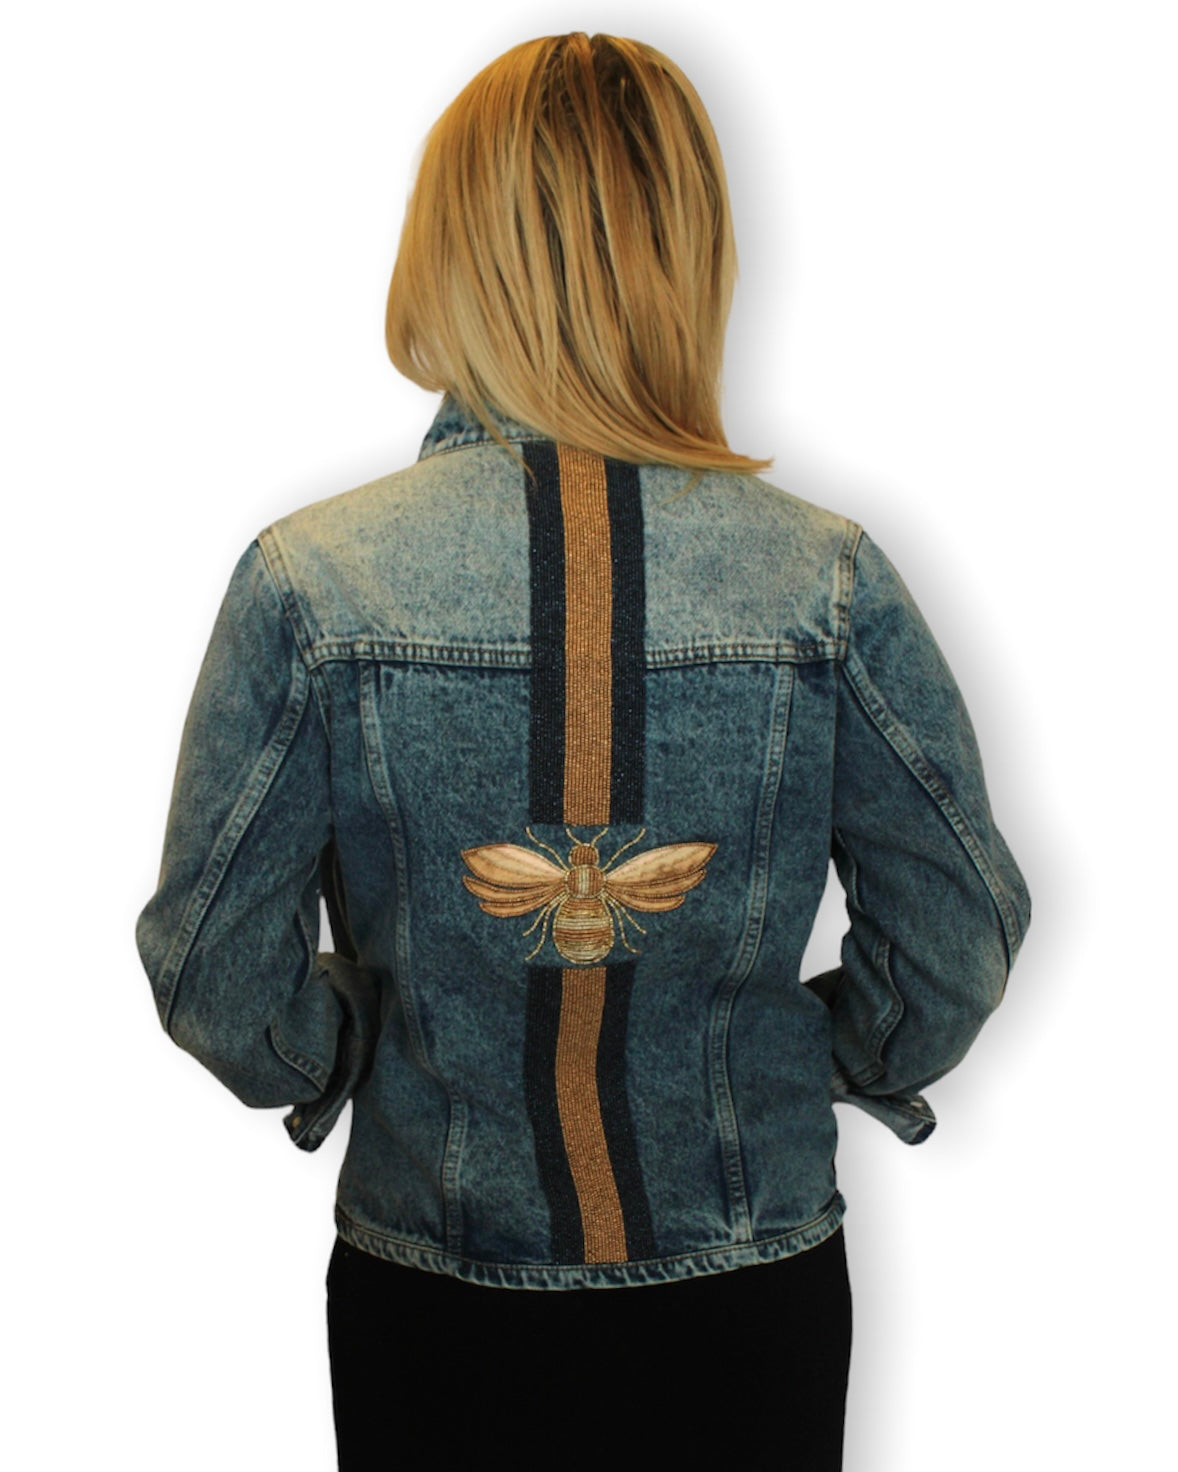 NAVY AND GOLD BEE JACKET